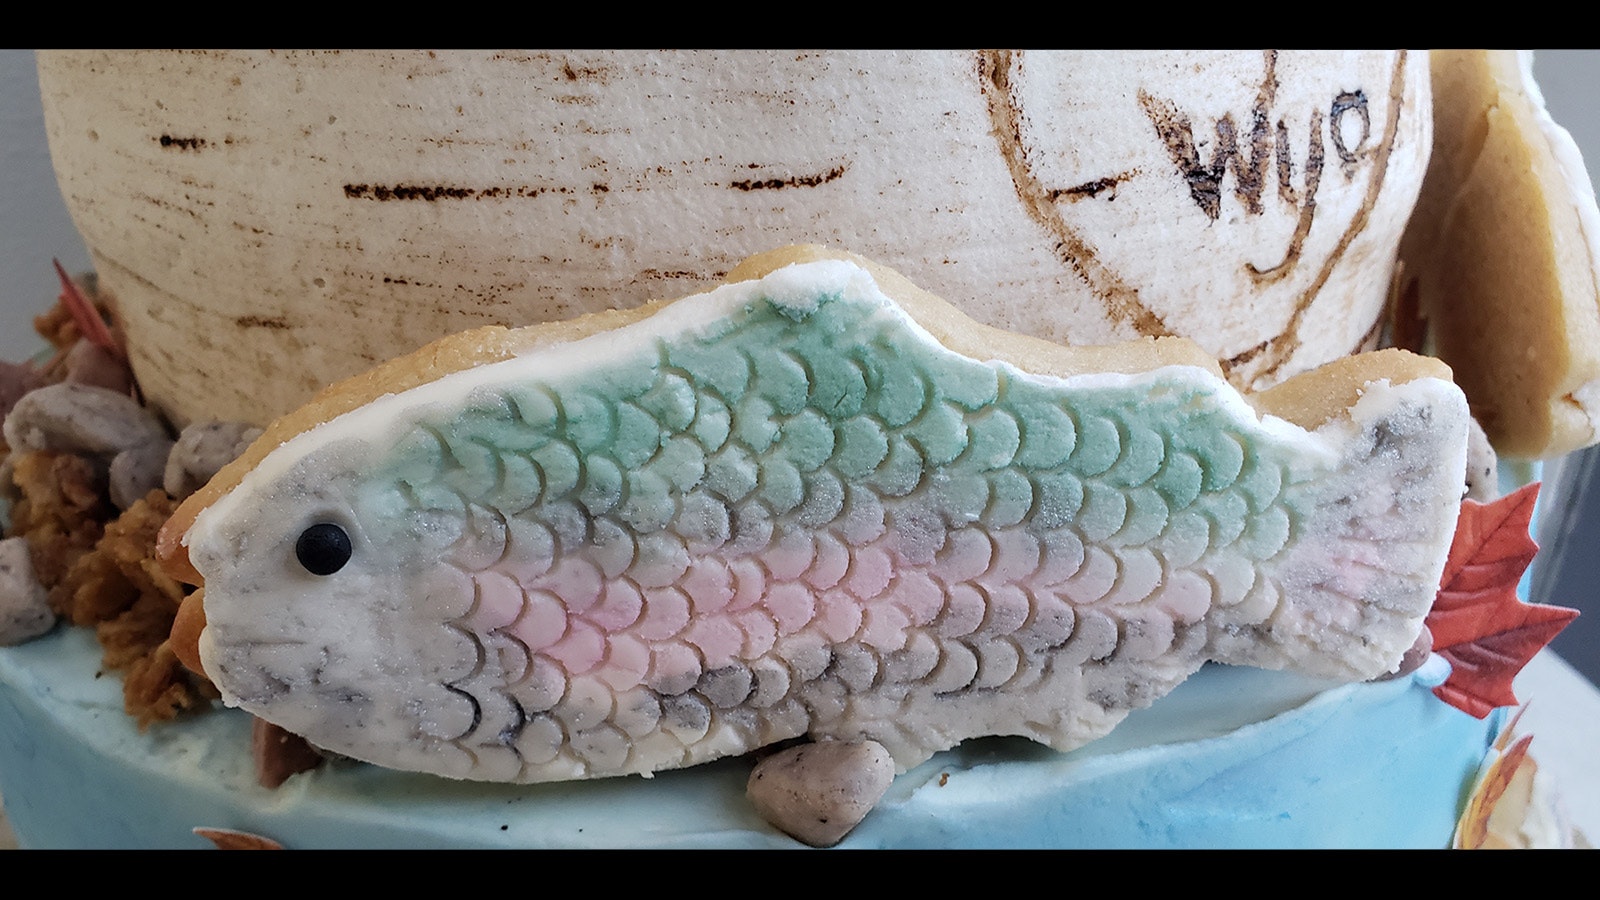 Sugar cookies were decorated to look like Wyoming trout.